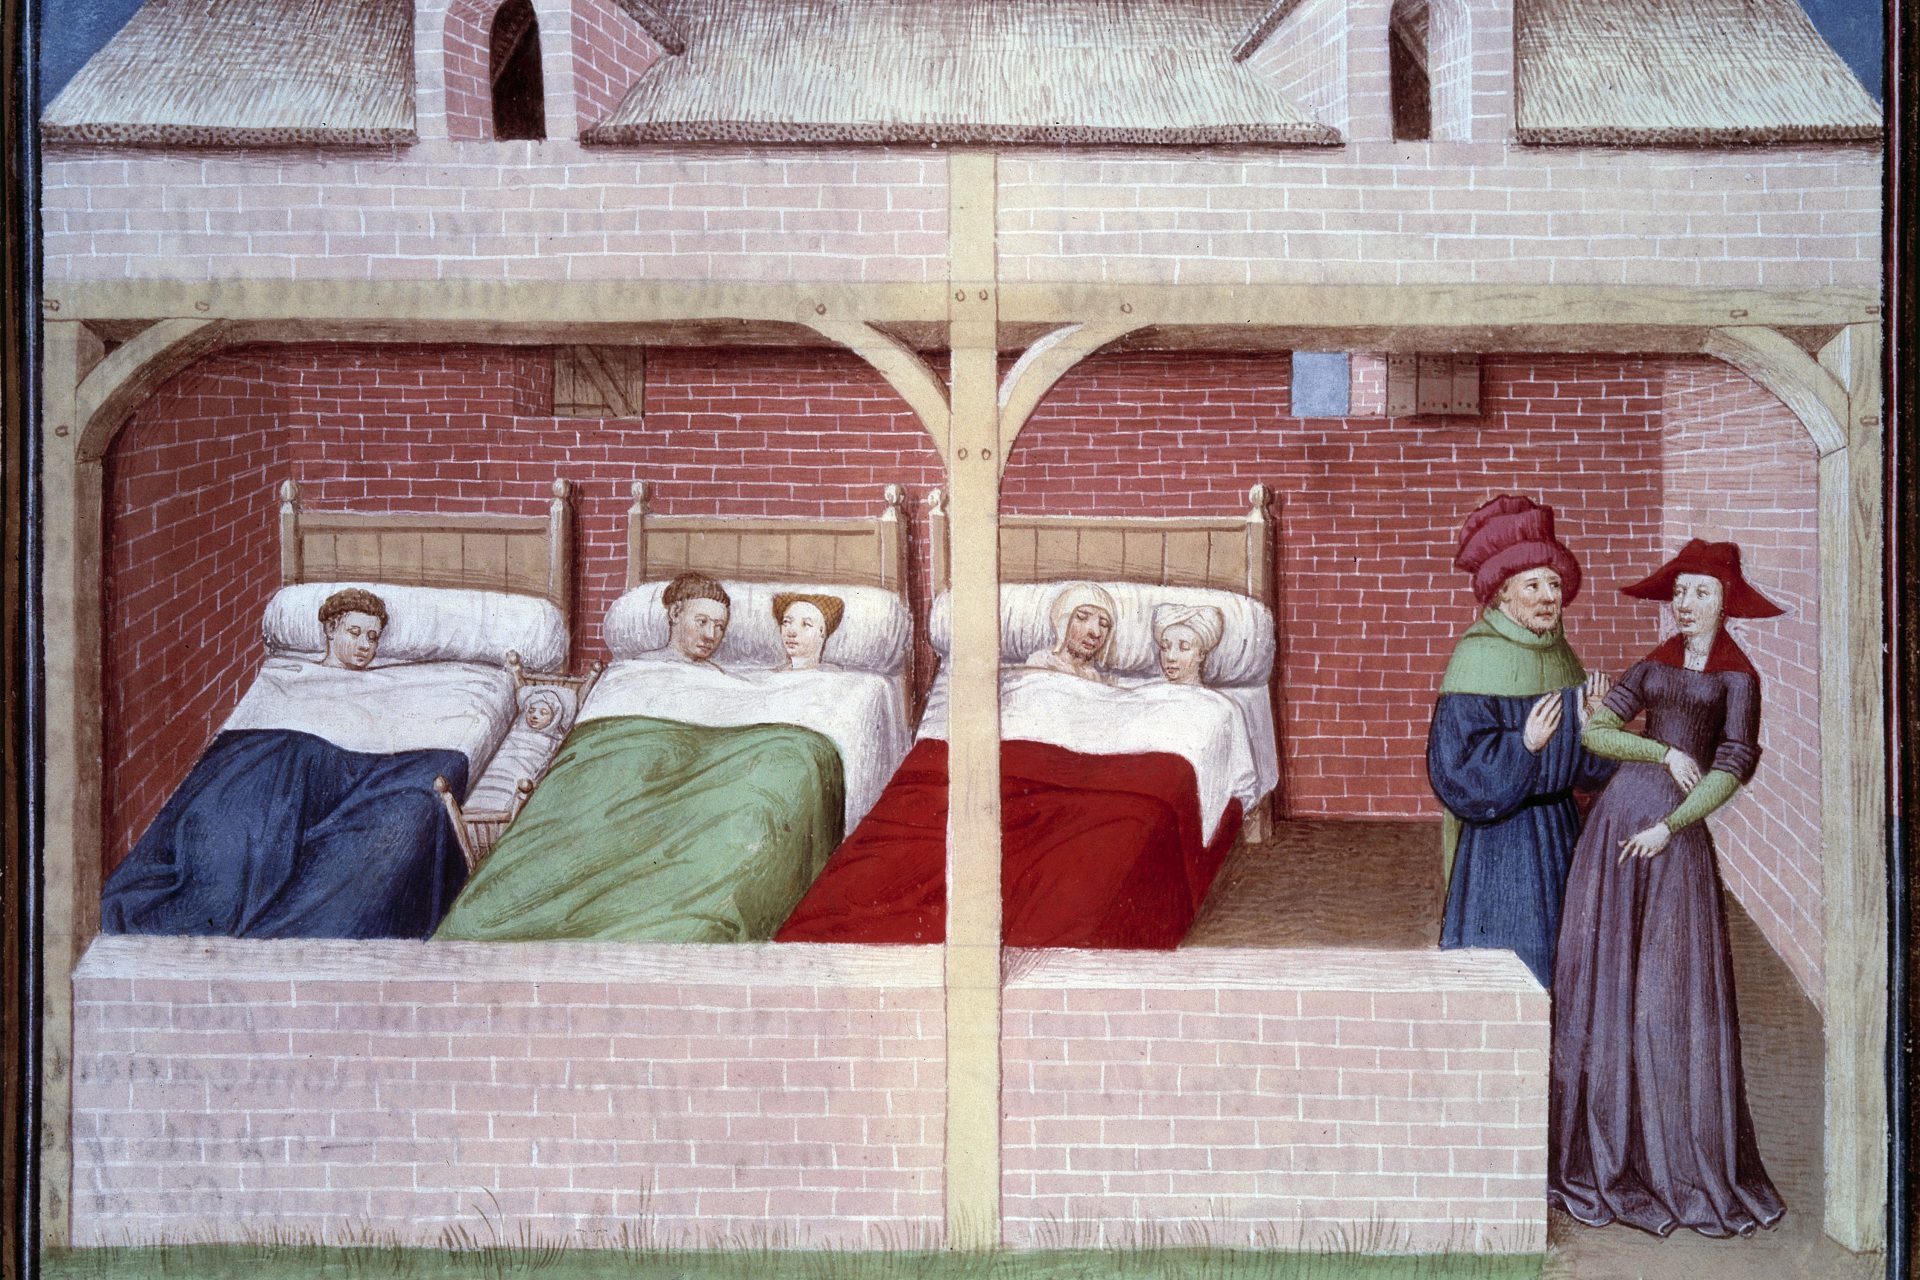 Have you ever wondered how people in the Middle Ages slept?